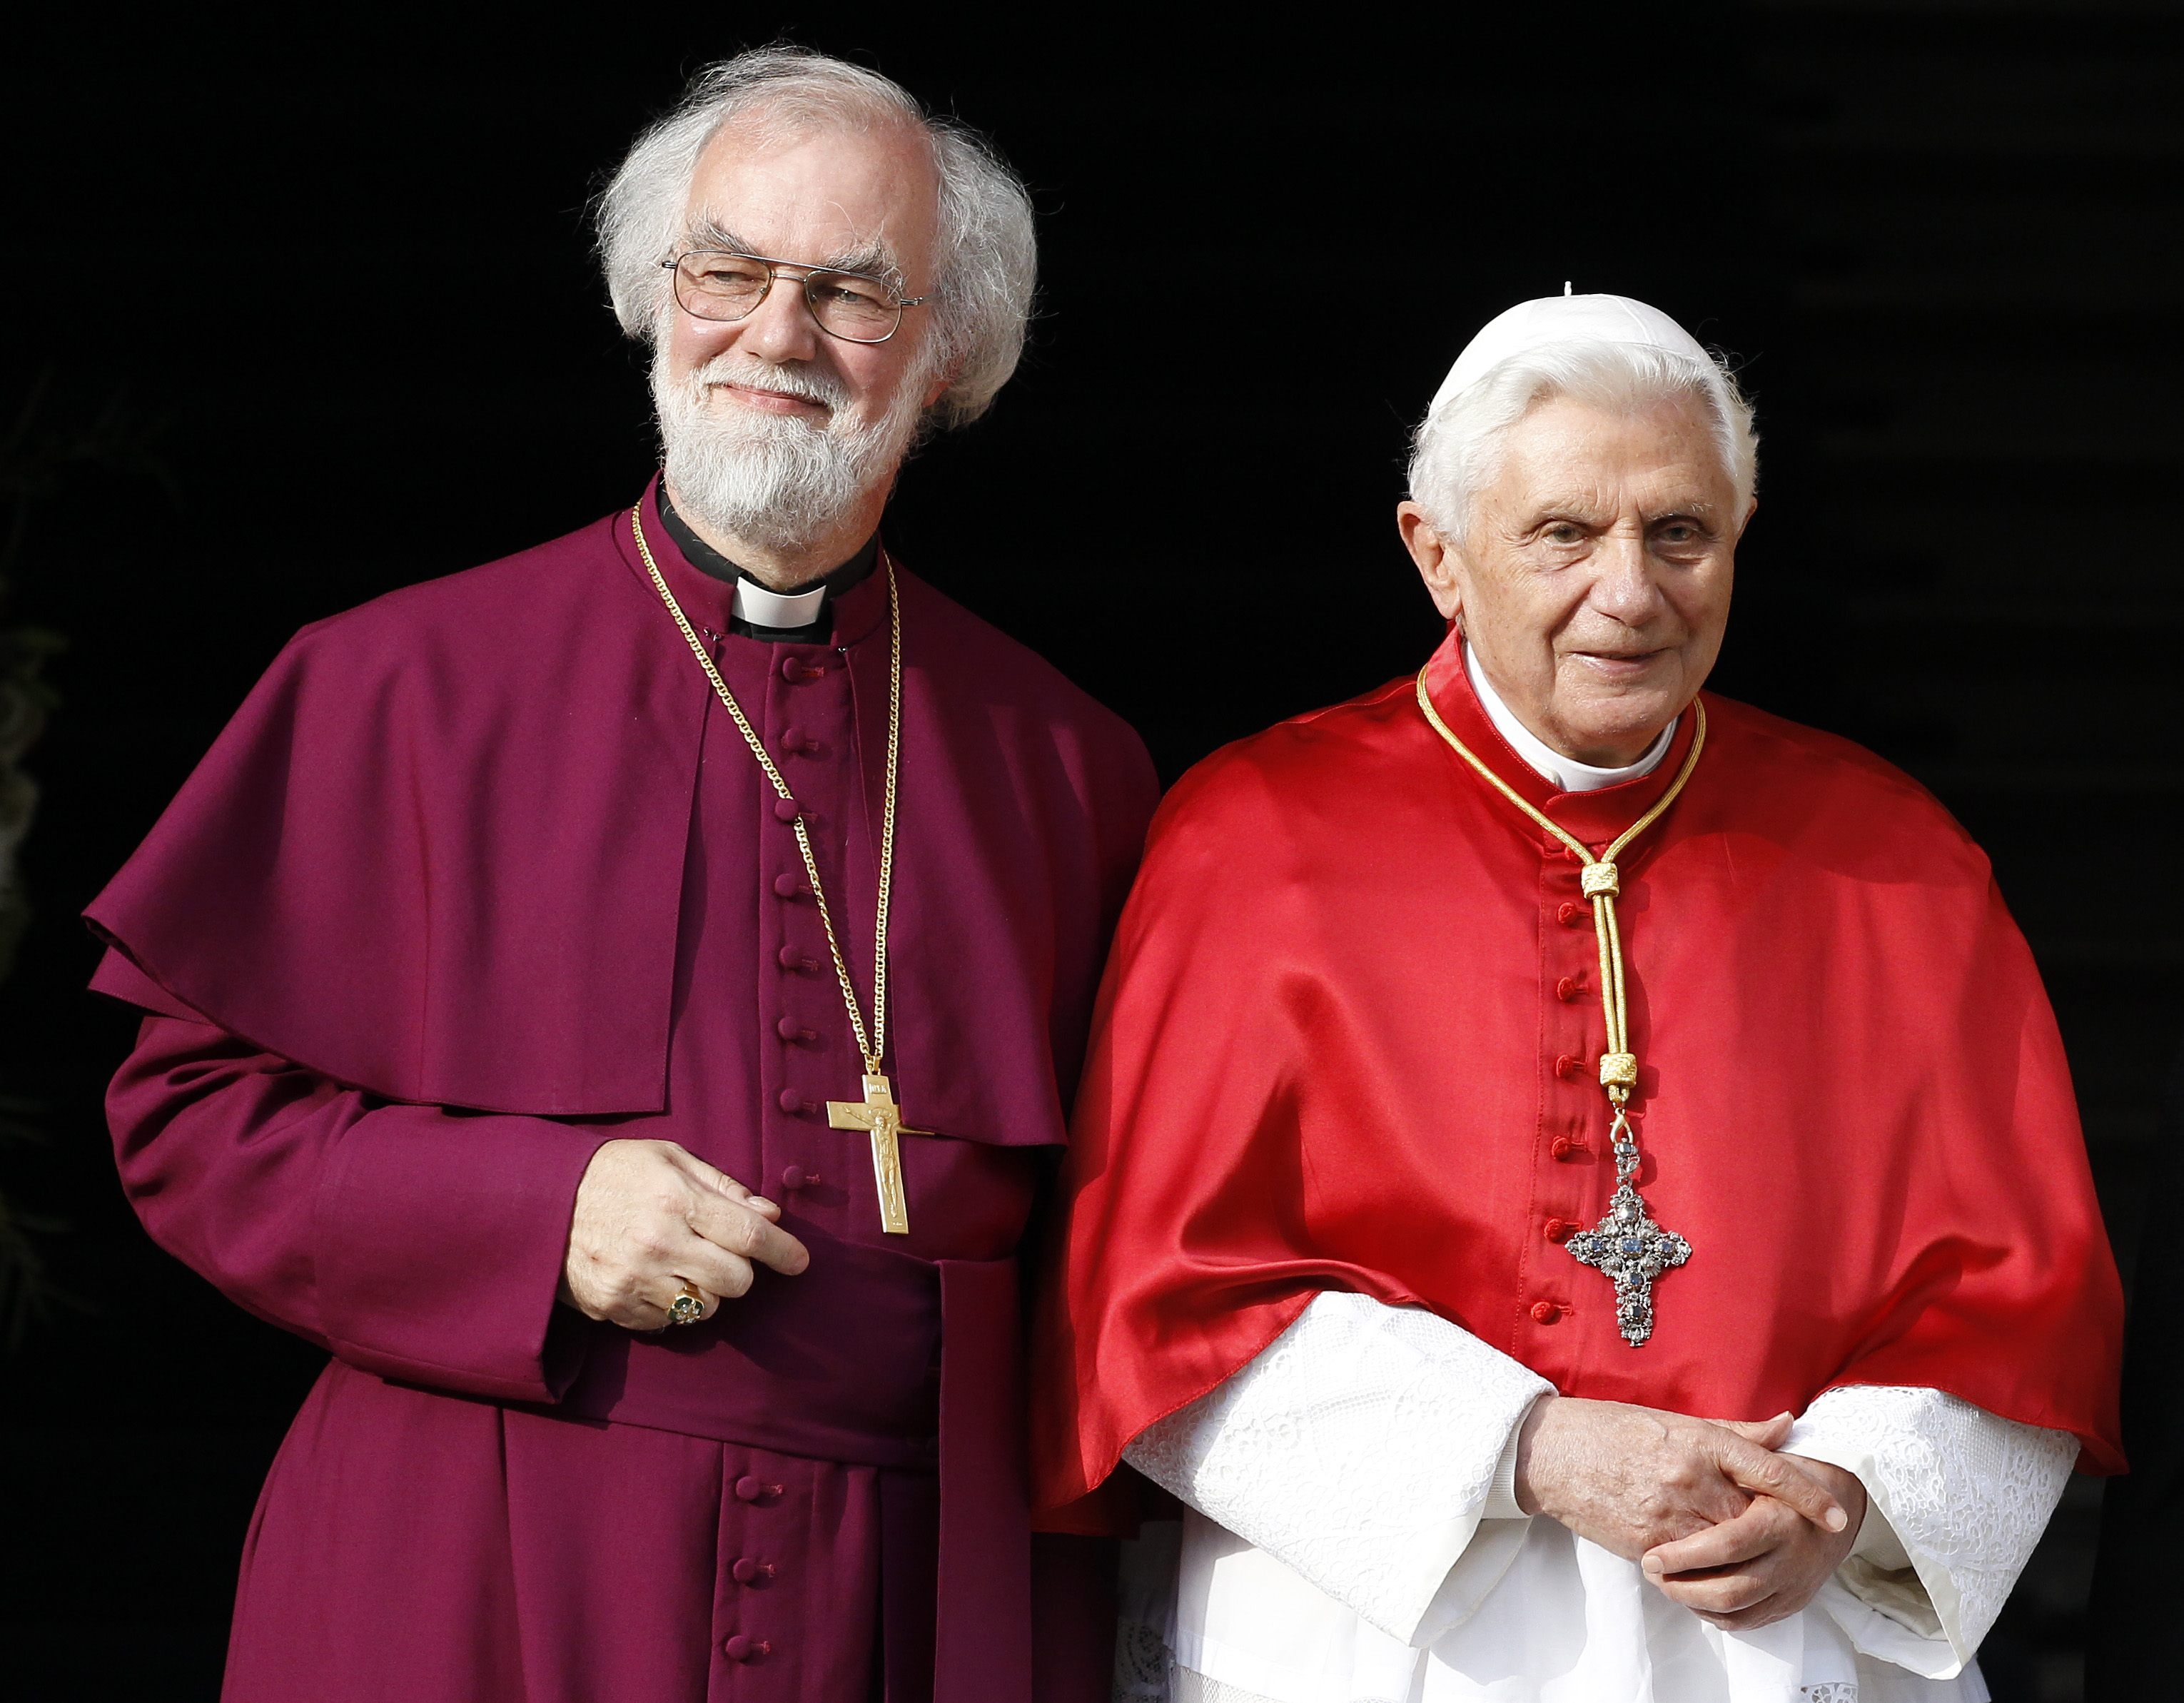 Interview: Rowan Williams on Pope Benedict's role in ecumenical dialogue | America